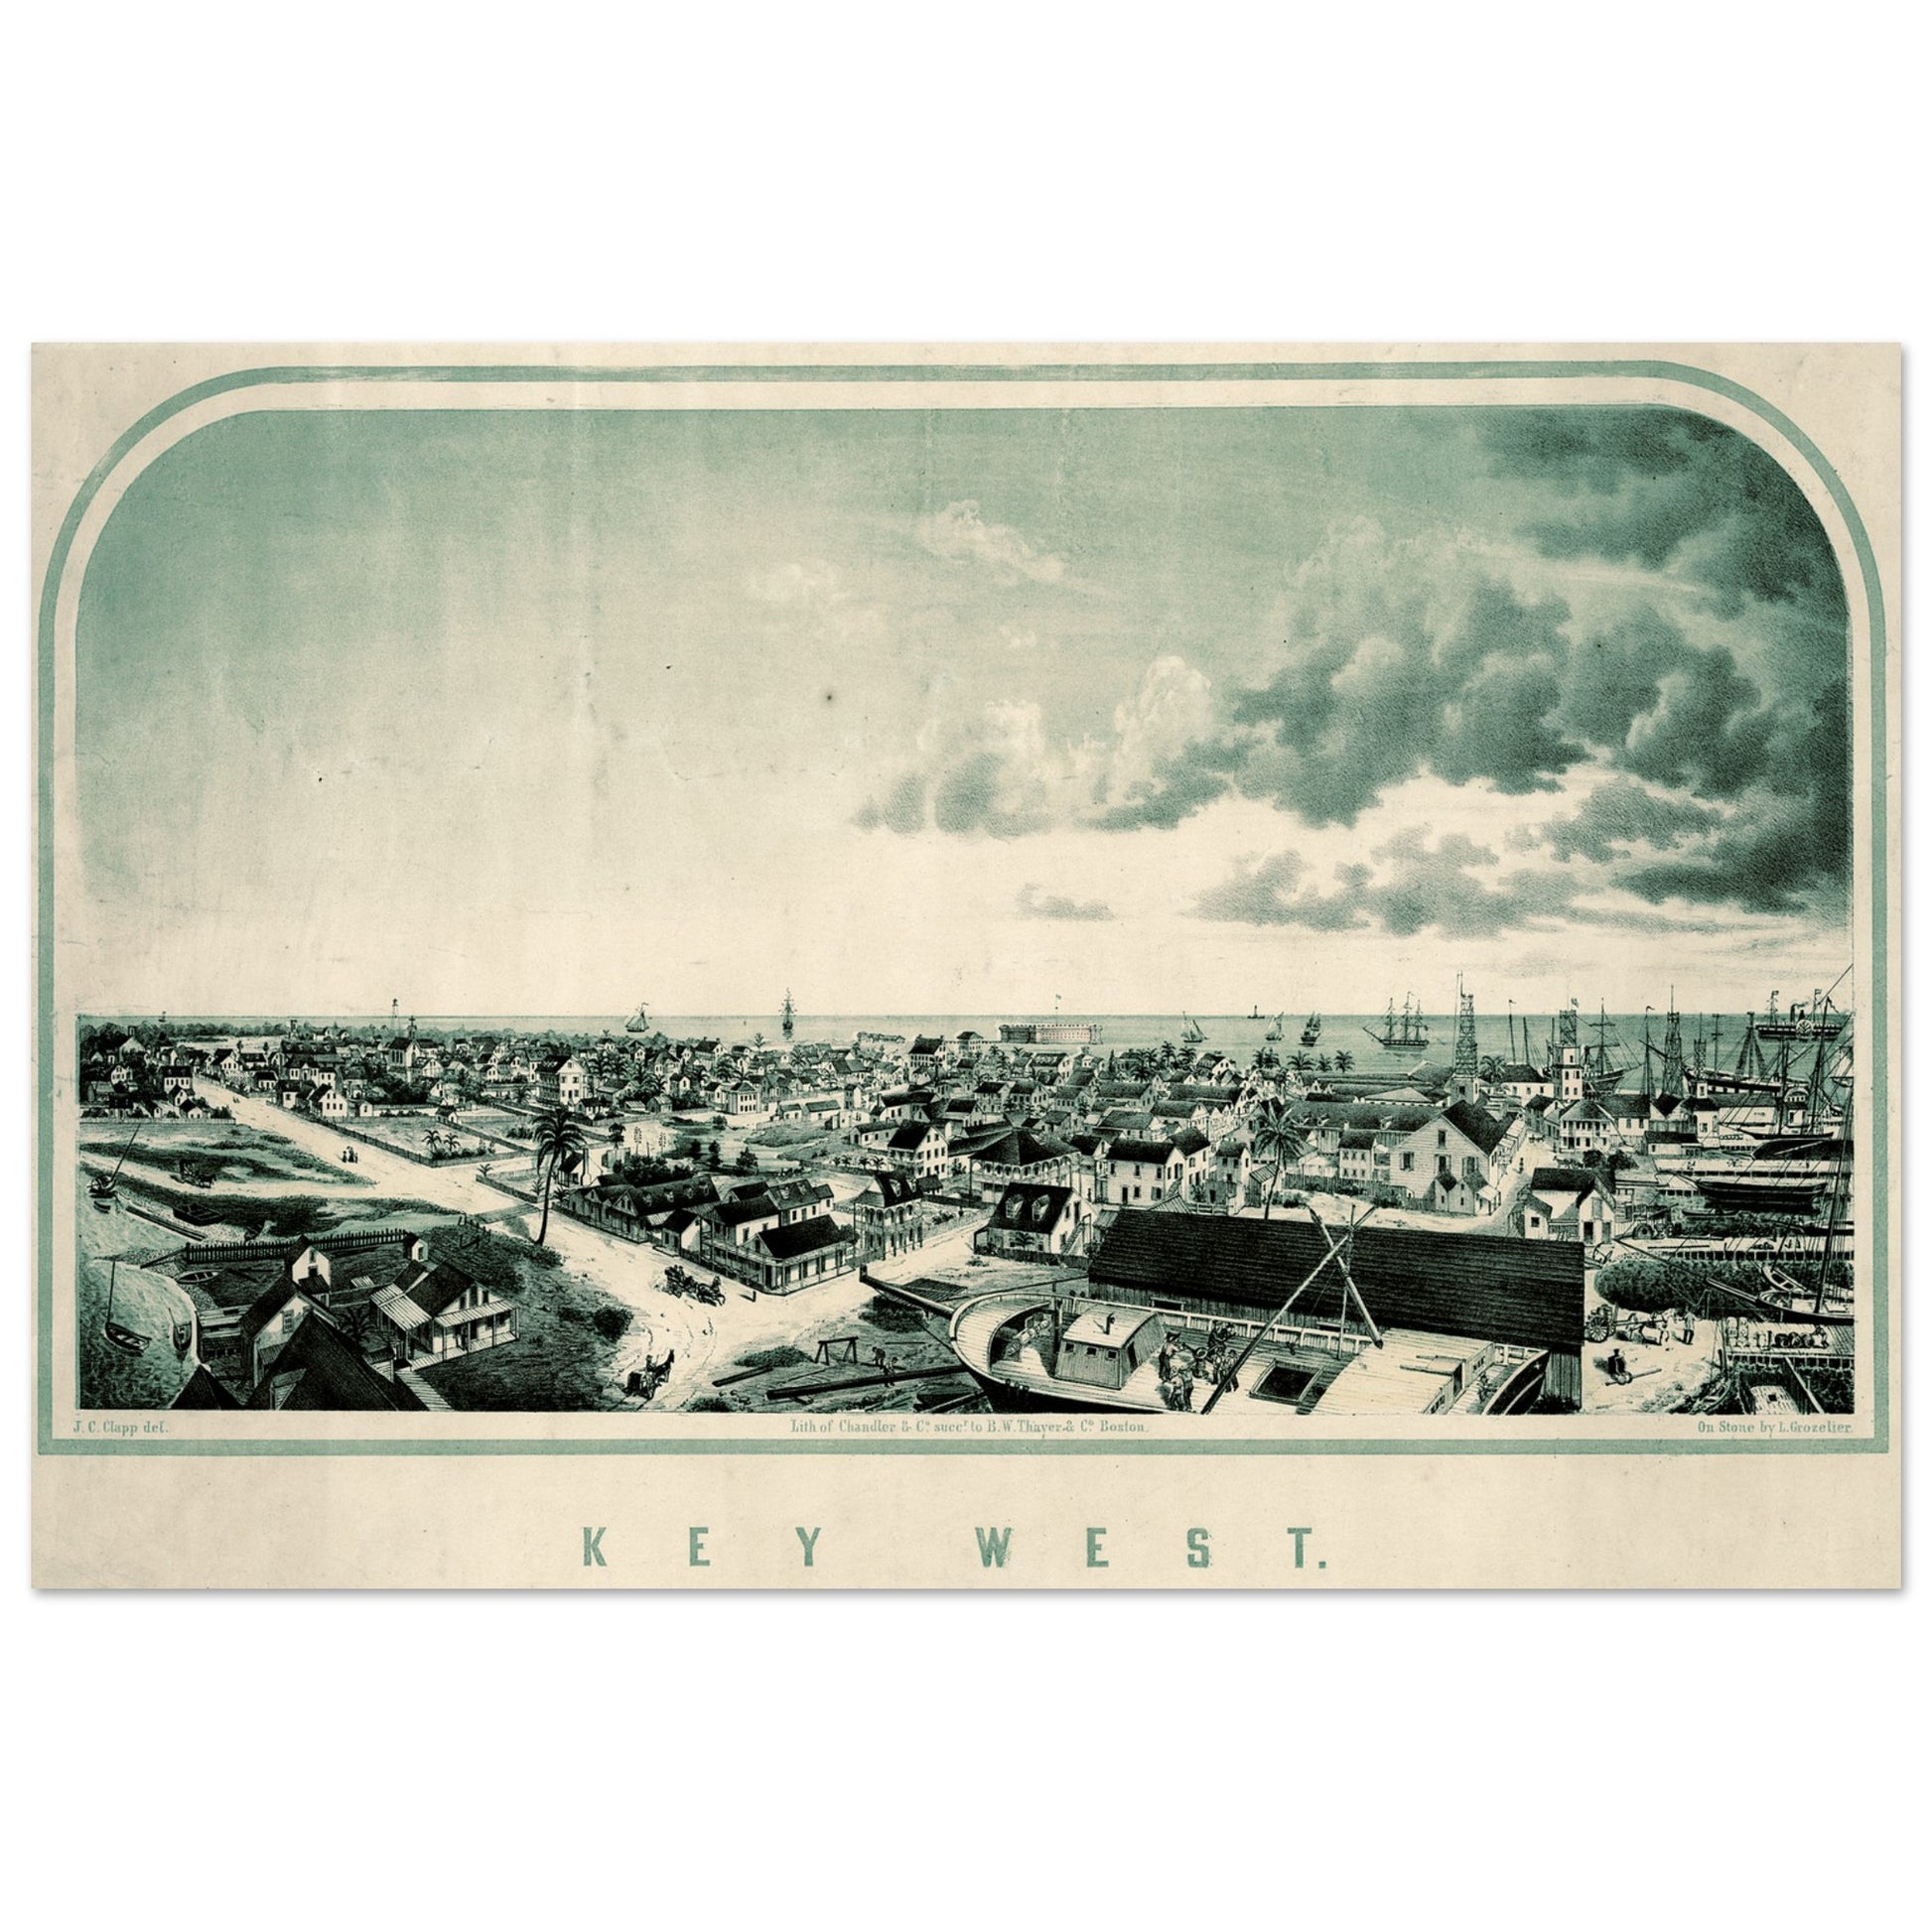 City view of Old Key West from 1855